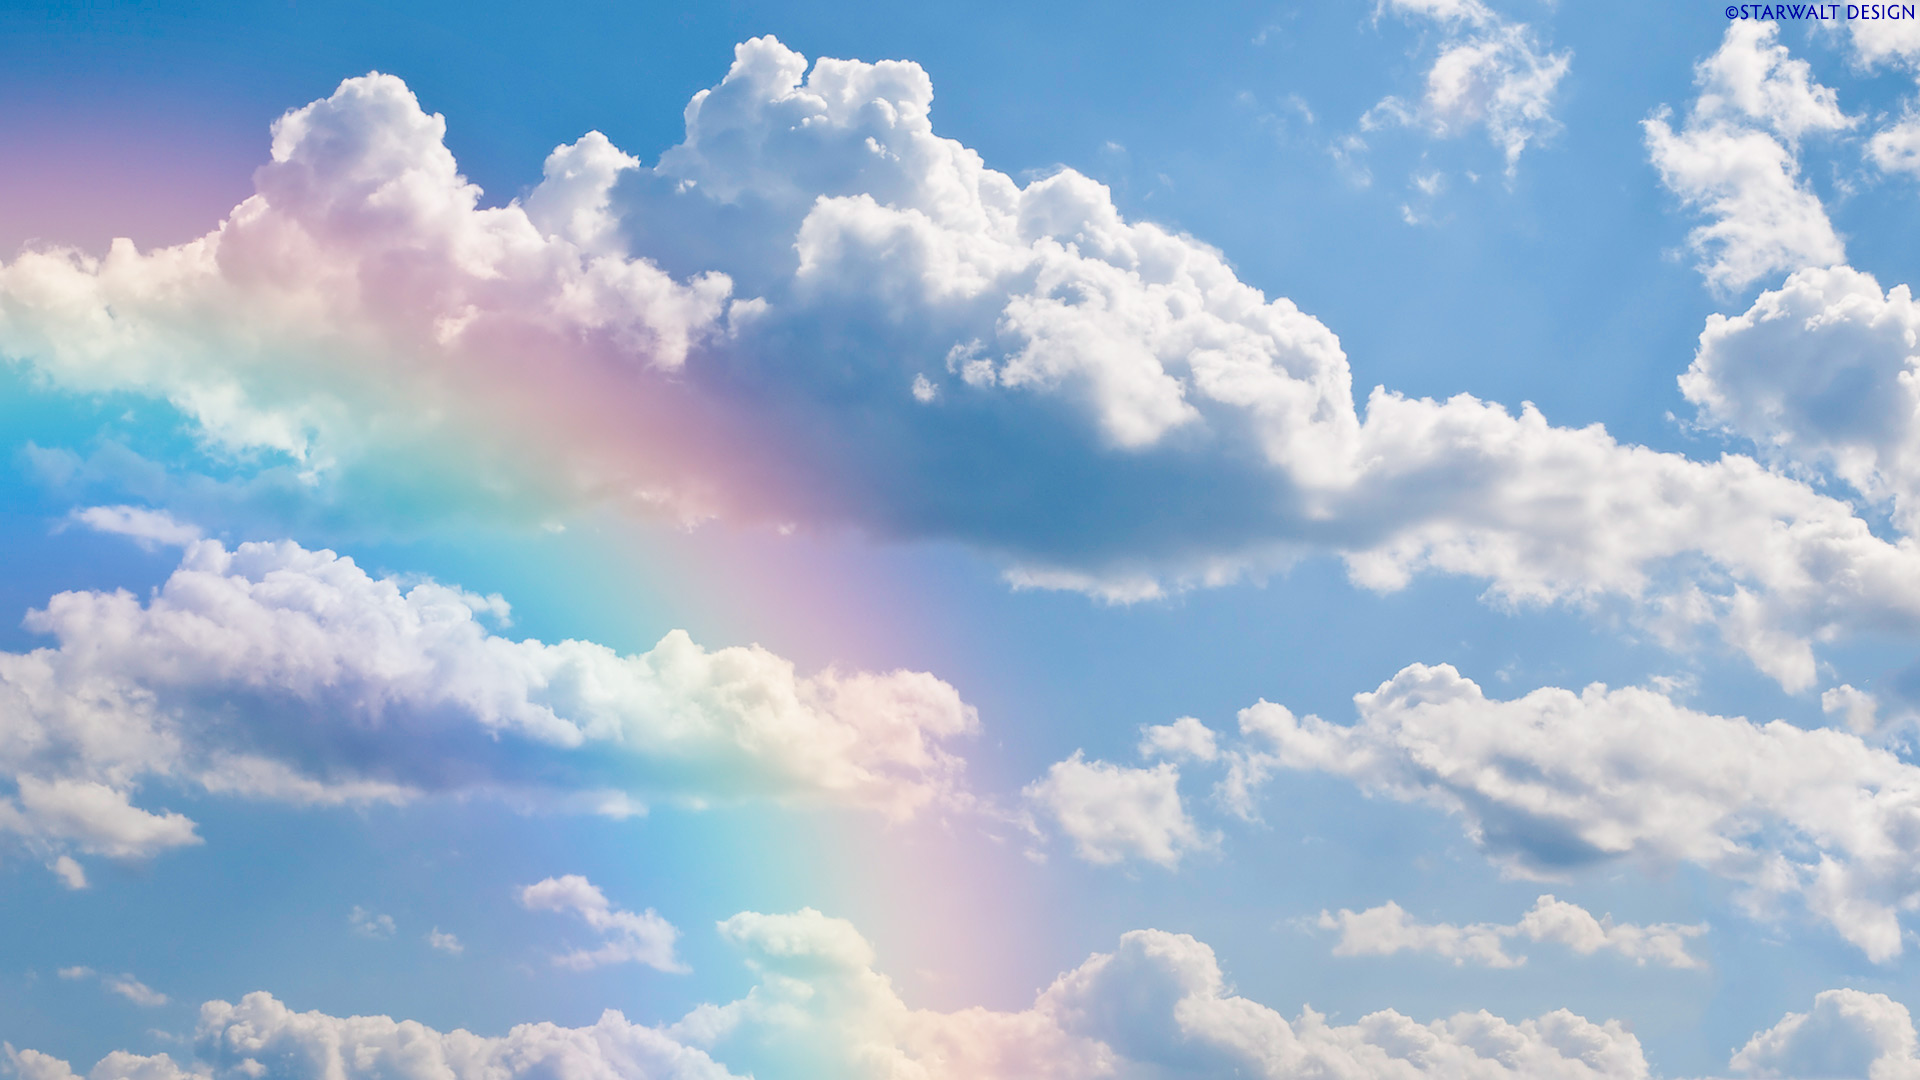 rainbow-in-the-sky-wallpaper-hd-hd-images-3.jpg (1920×1080) | the ...